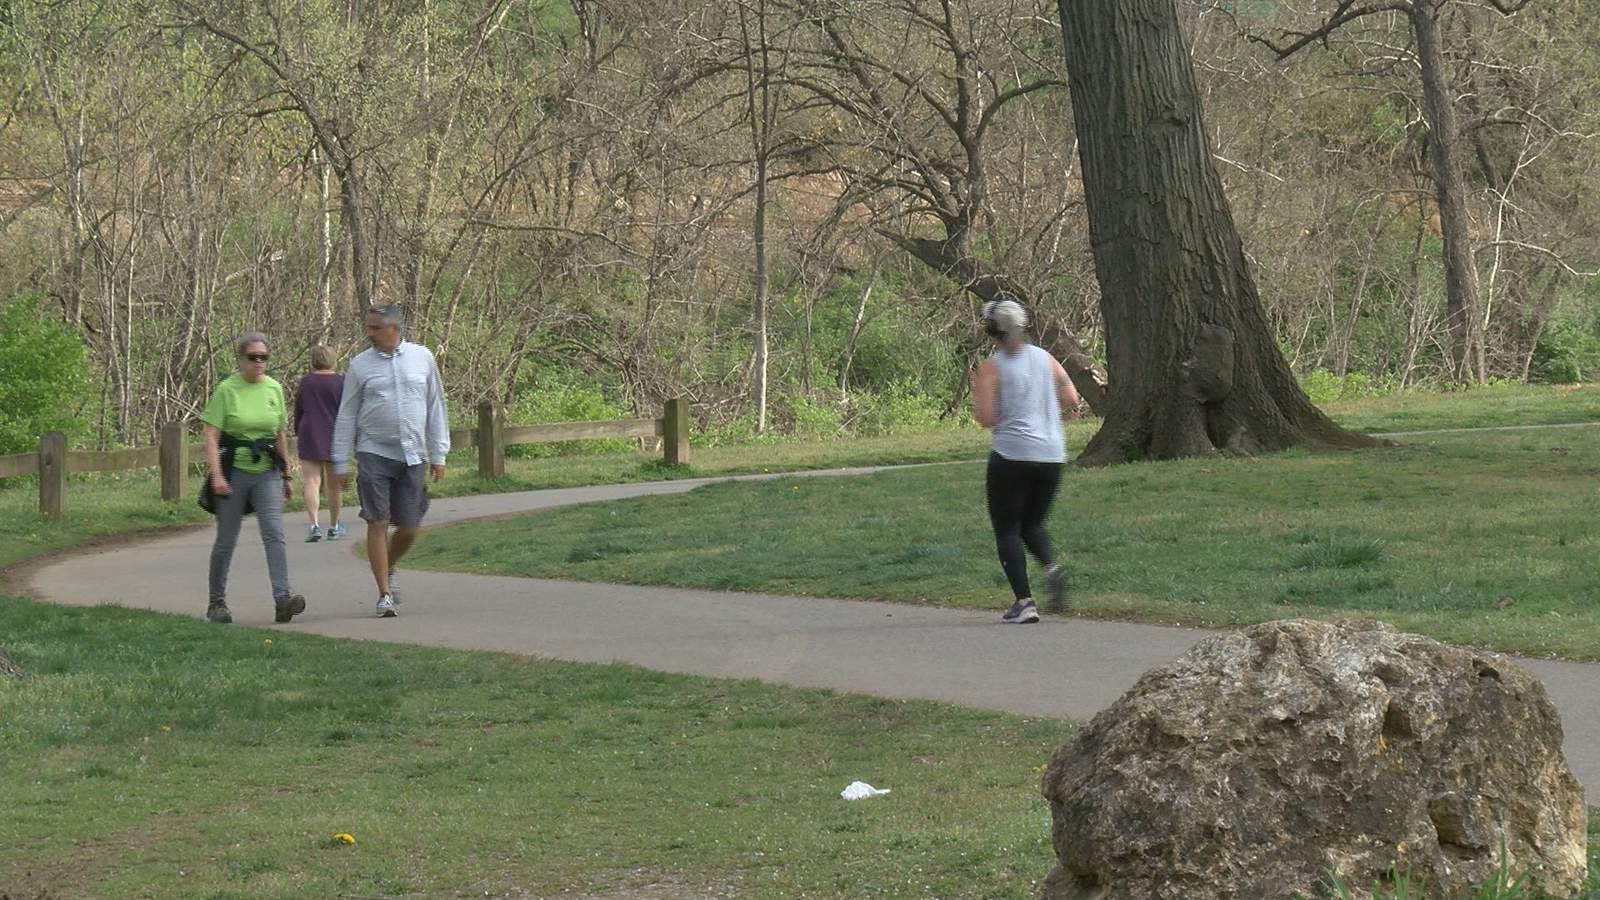 Roanoke River Greenway will finally connect Roanoke and Salem